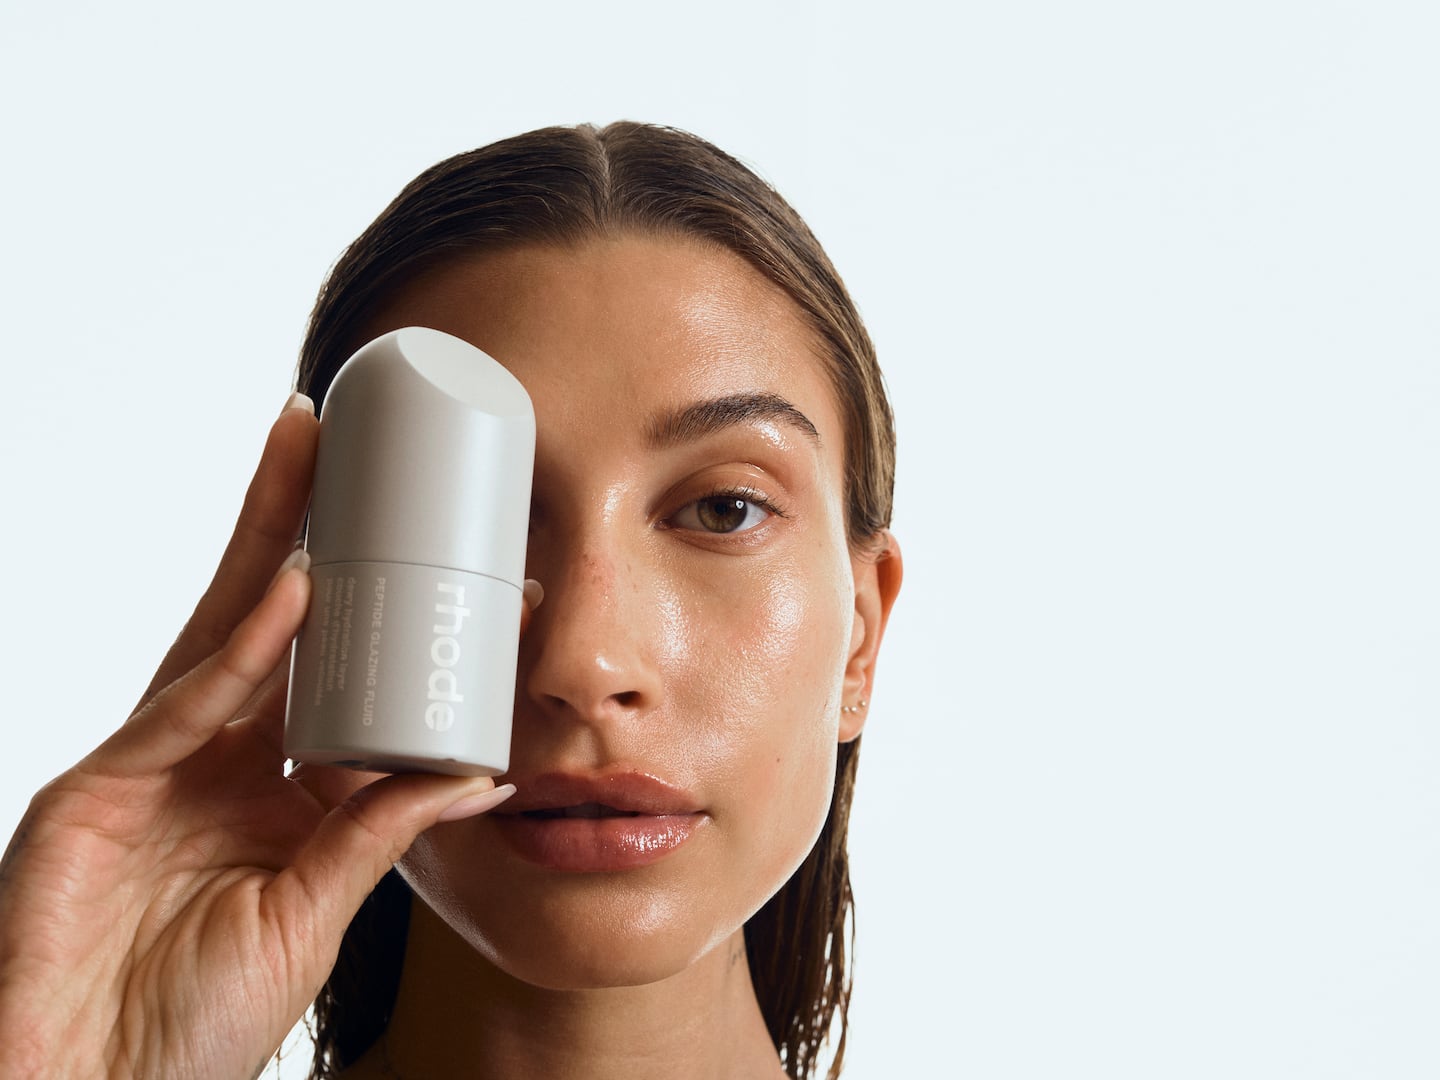 Hailey Bieber's Rhode skin care line is launching into a crowded market for celebrity brands.